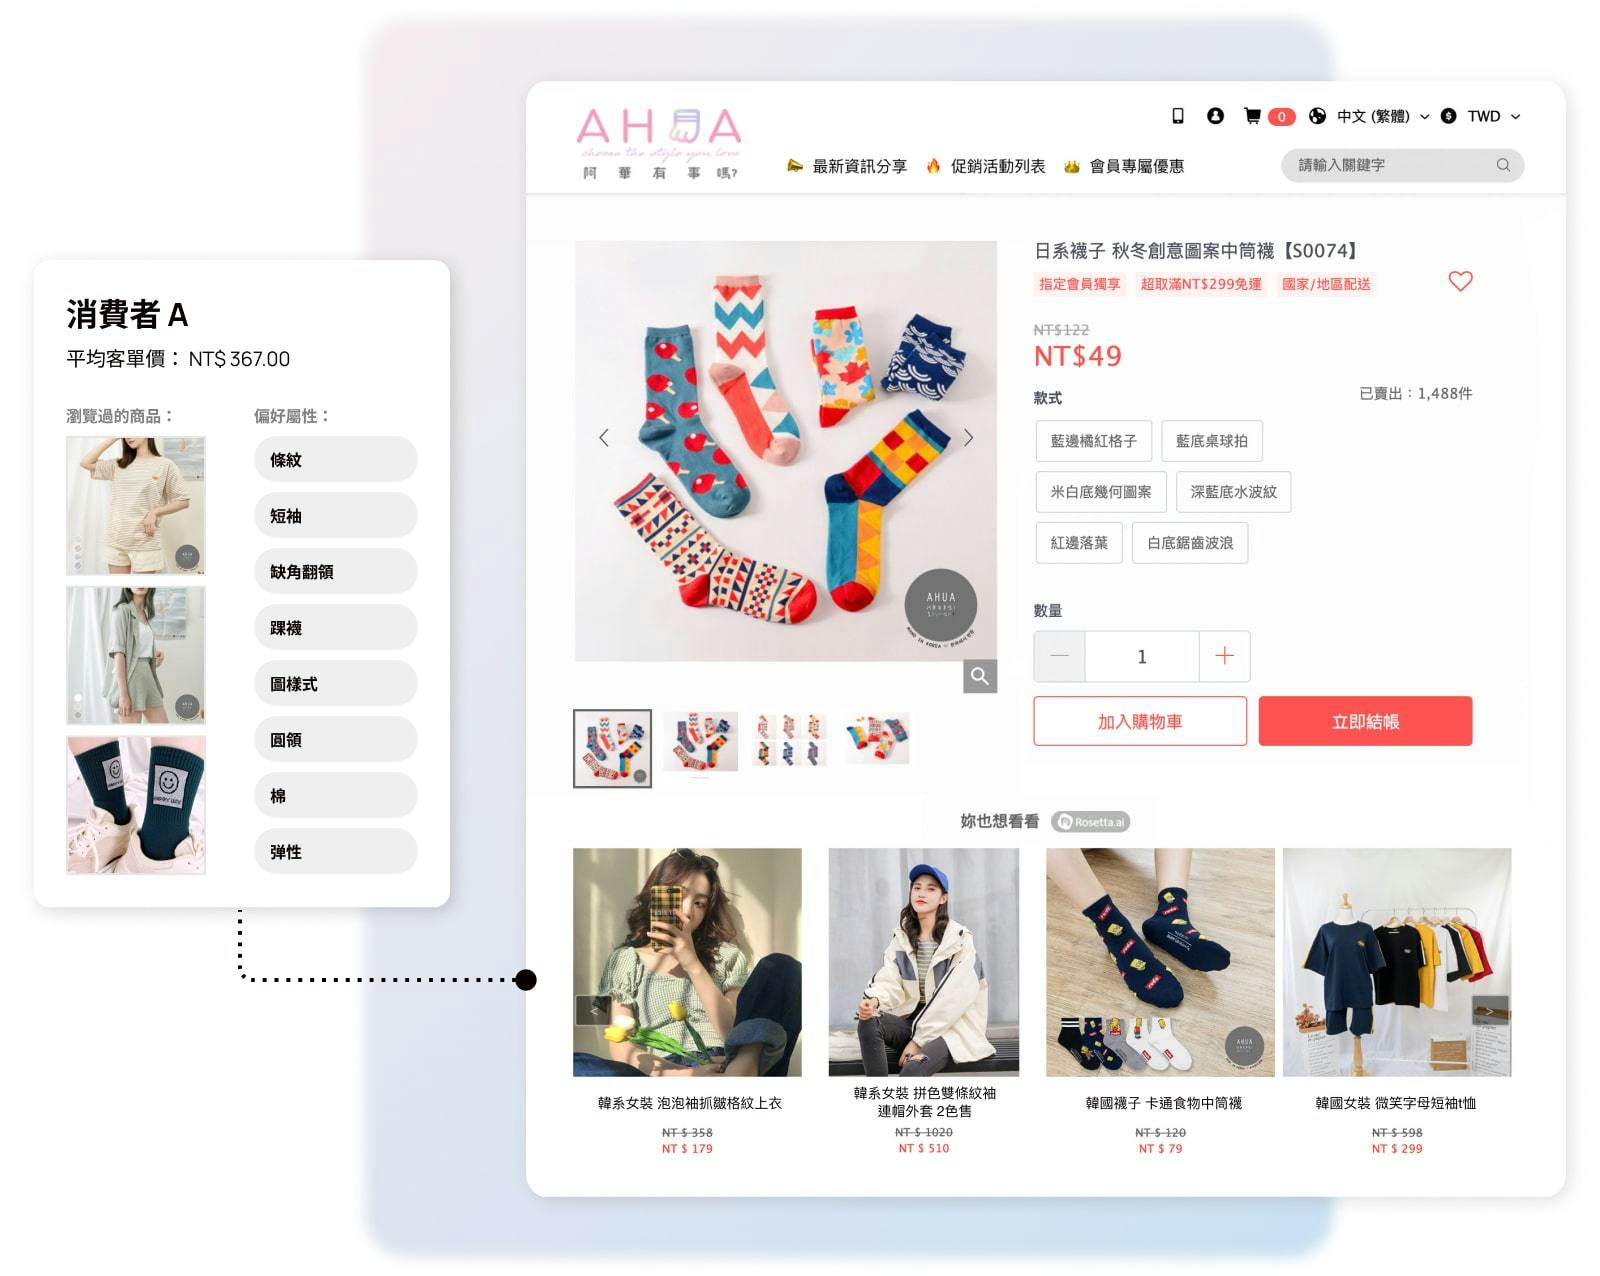 Rosetta AI will help ecommerce to collect customer's personalized data and build their profile